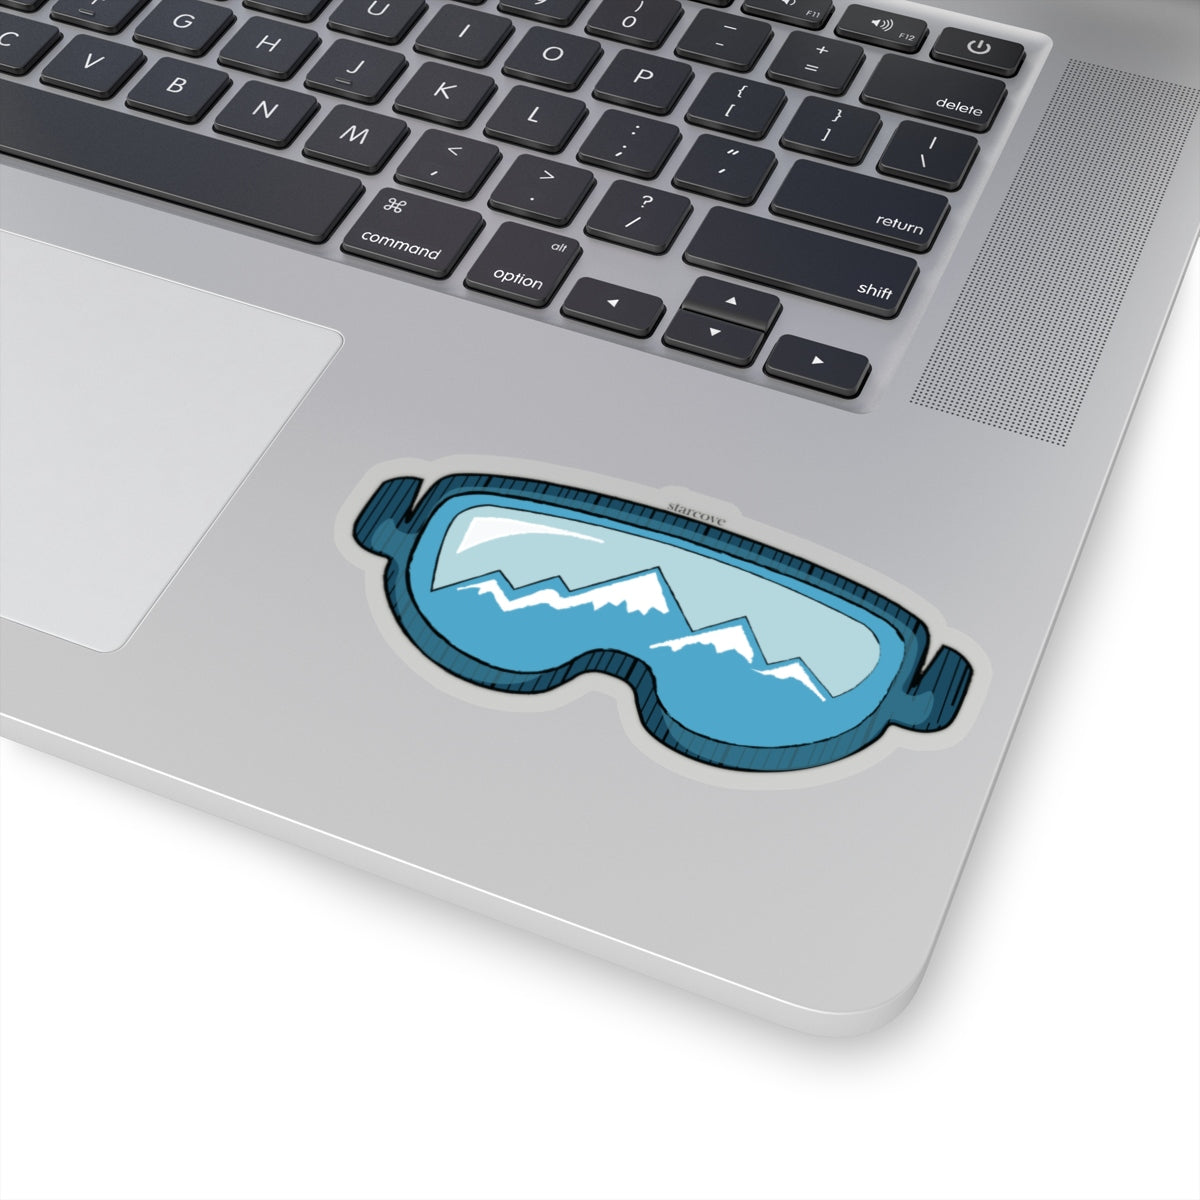 Snow Ski Goggles Mountain Stickers, Skiing Mask Blue Laptop Vinyl Cute Tumbler Car Bumper Aesthetic Label Wall Mural Decal Die Cut Starcove Fashion